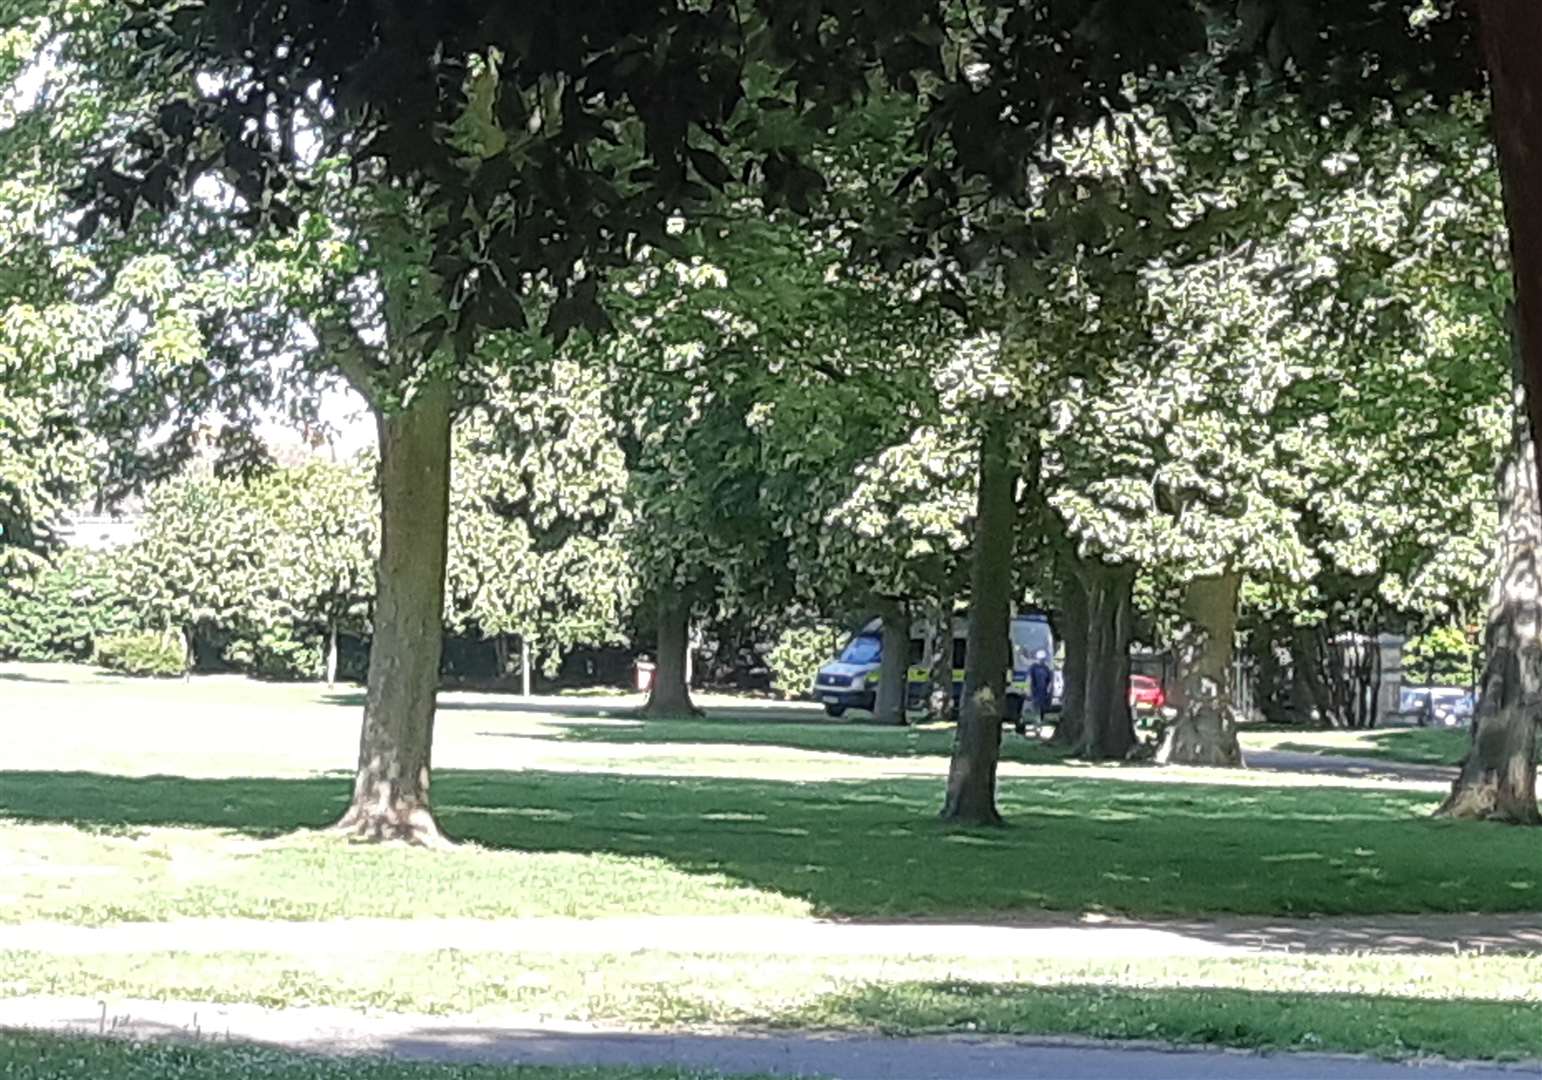 A police van was in Gillingham Park, Canterbury Street, Gillingham this morning after travellers invaded the park